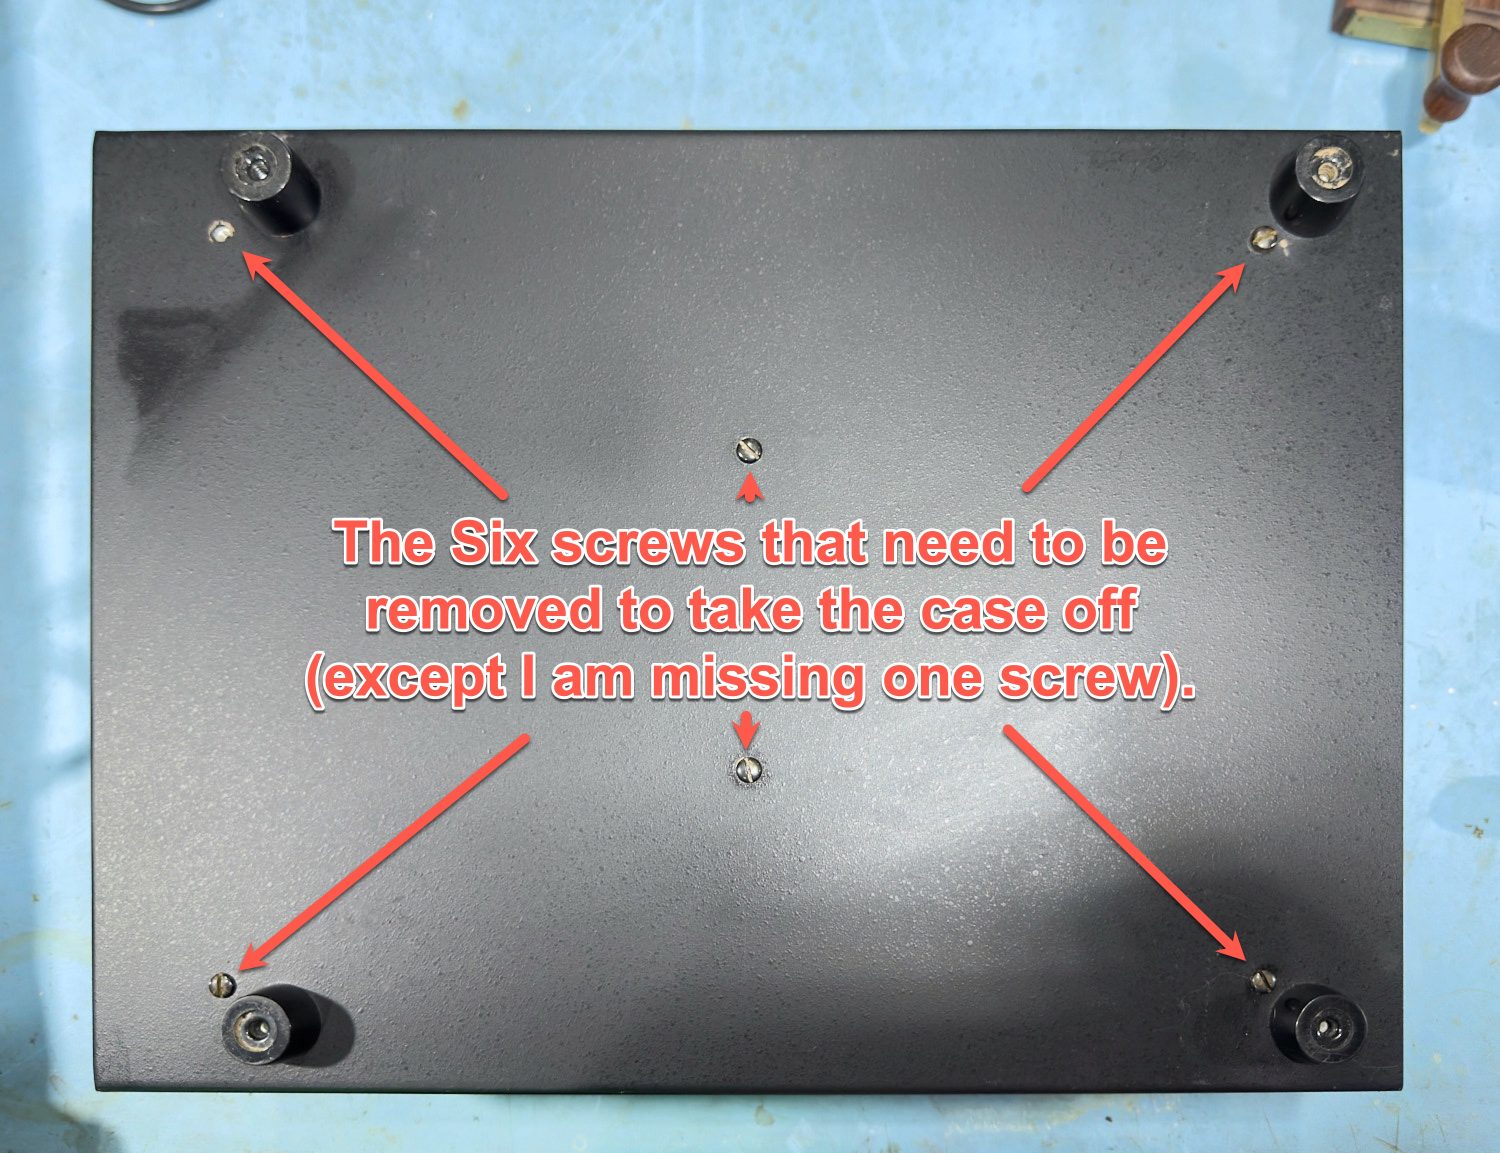 There are 6 screws that you need to remove from the underside to remove the case.